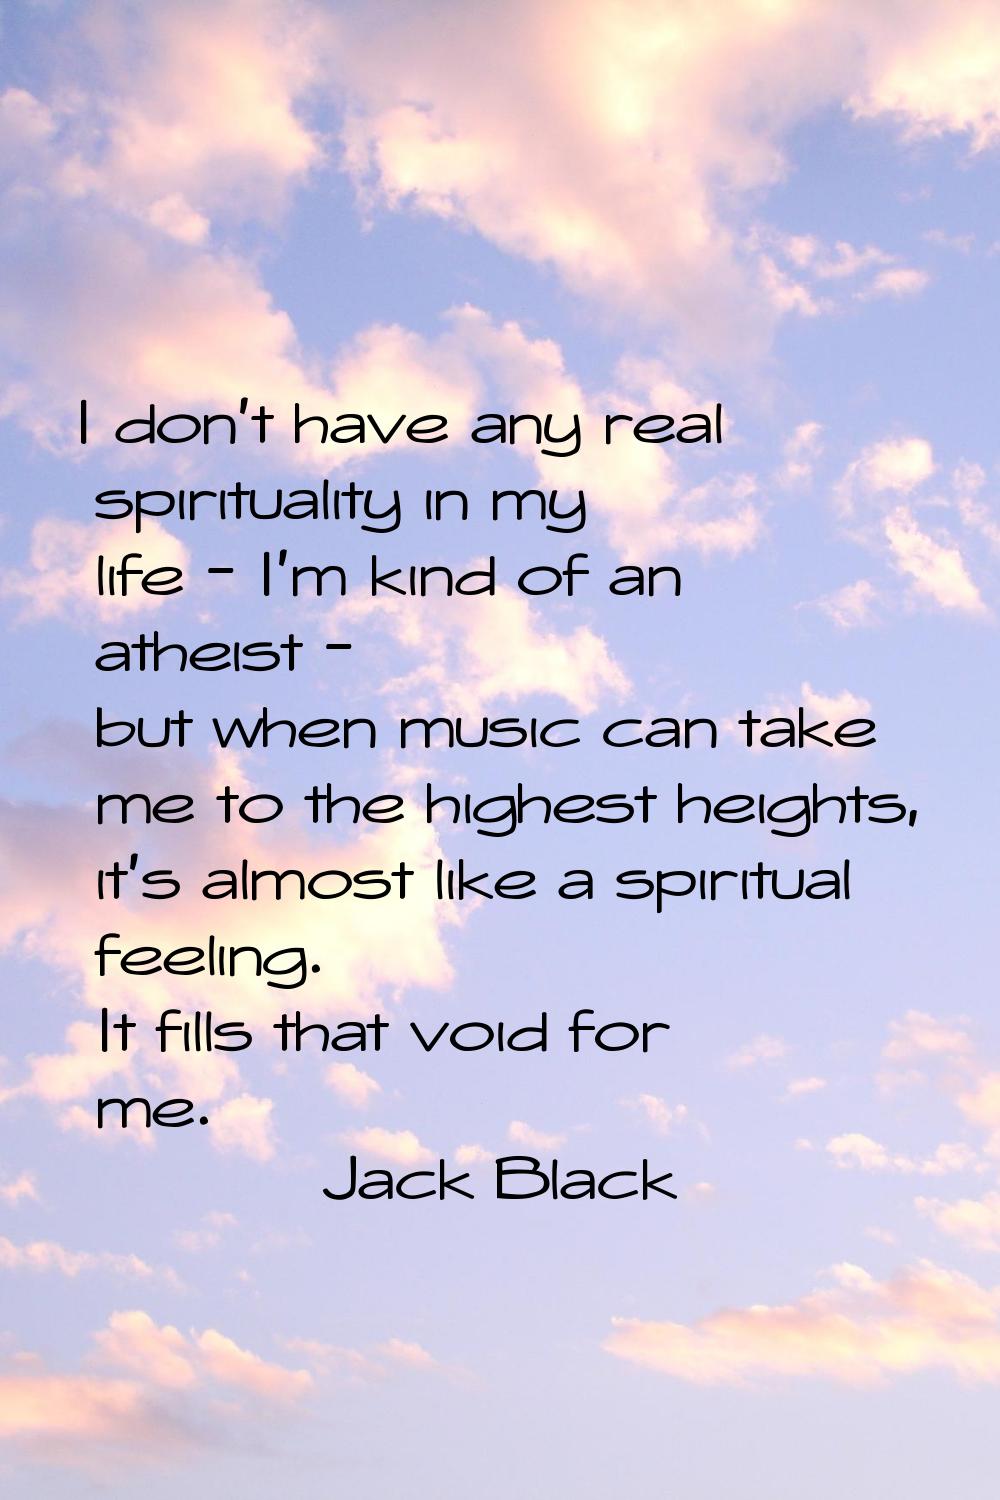 I don't have any real spirituality in my life - I'm kind of an atheist - but when music can take me